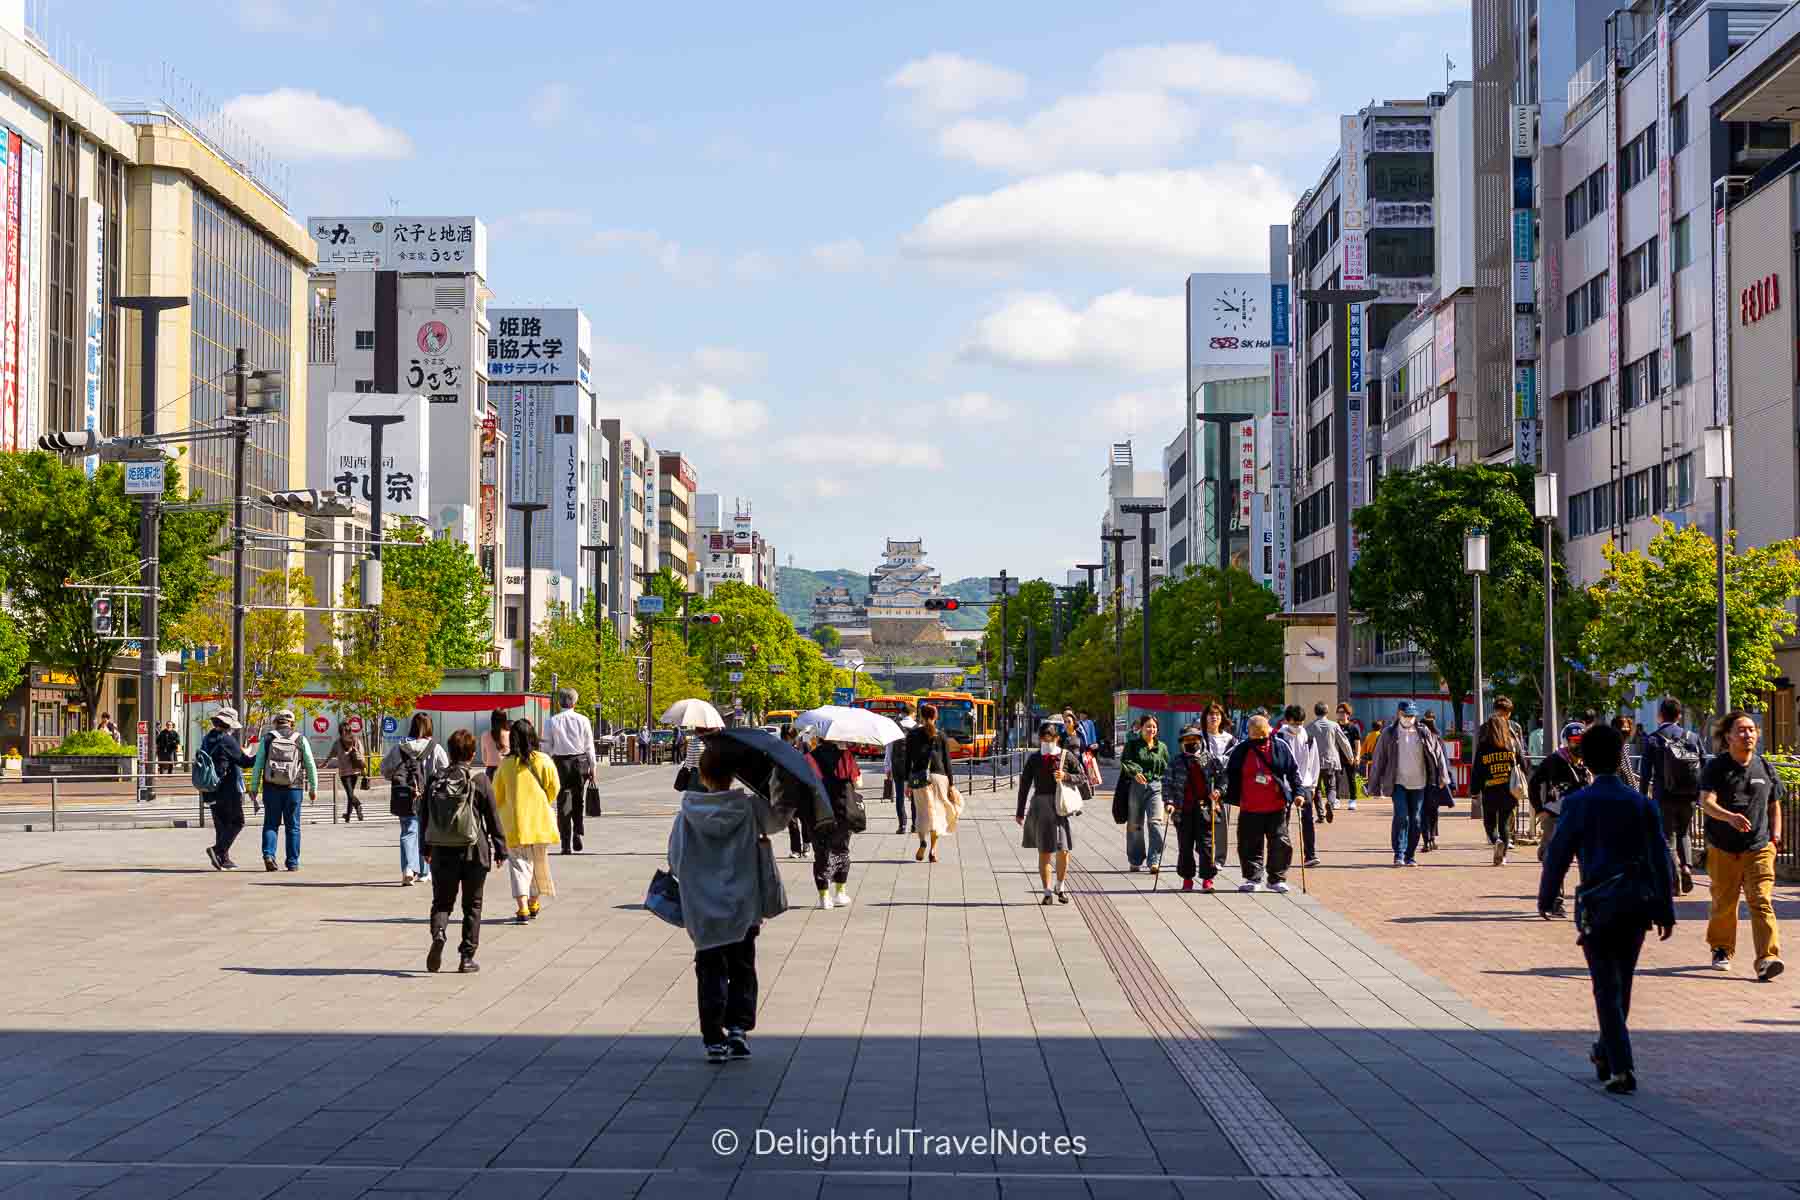 View of the street and Himeji castle outside Himeji station.